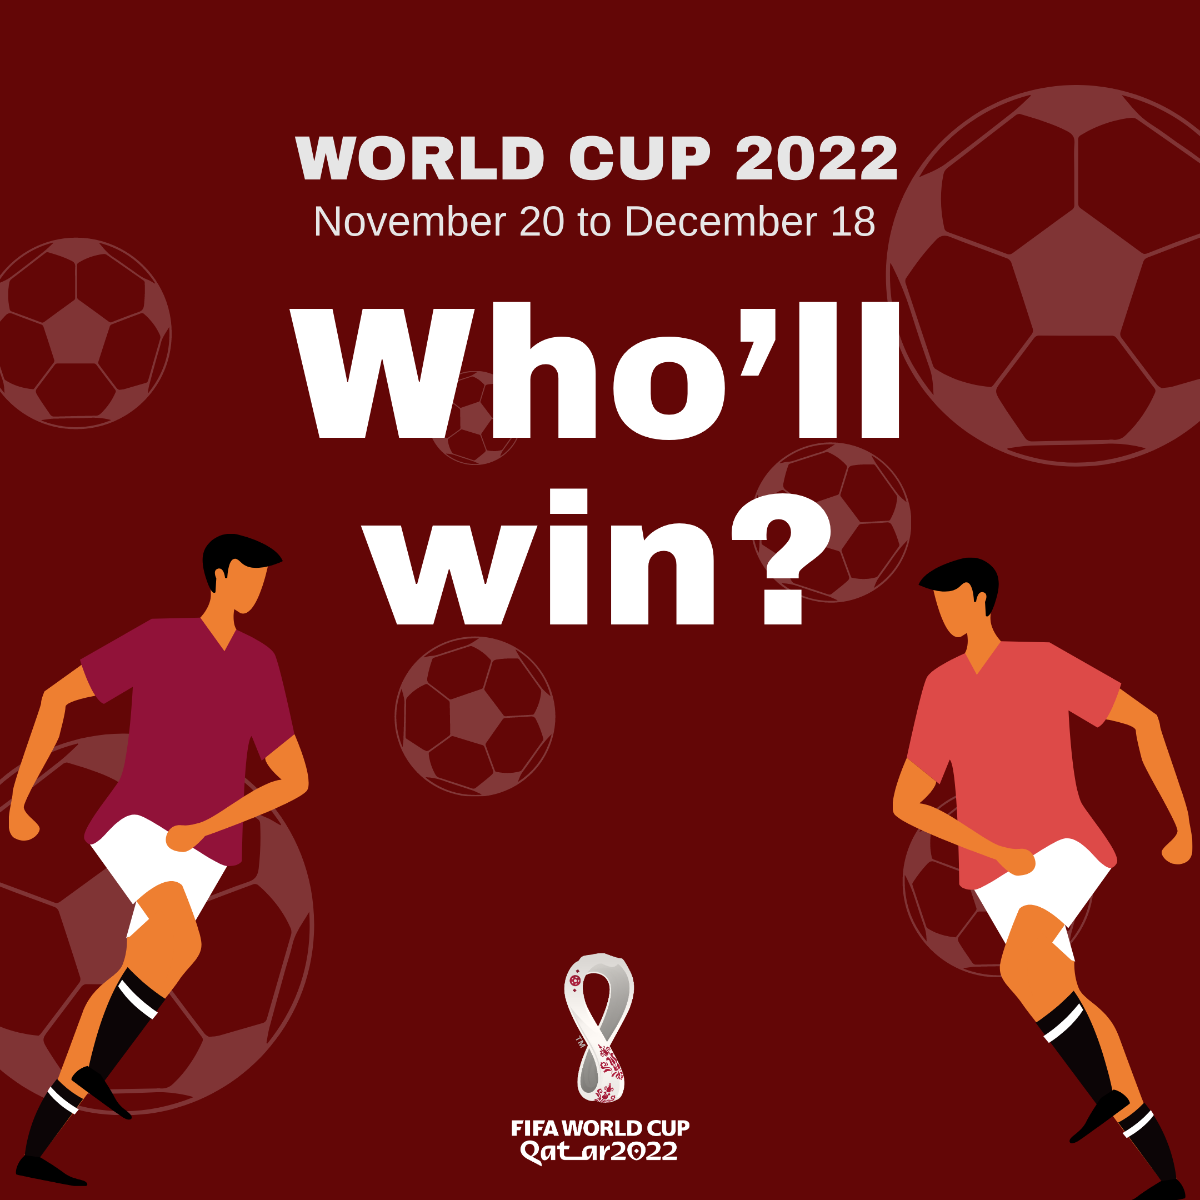 World Cup 2022 Facebook Ad Banner Template